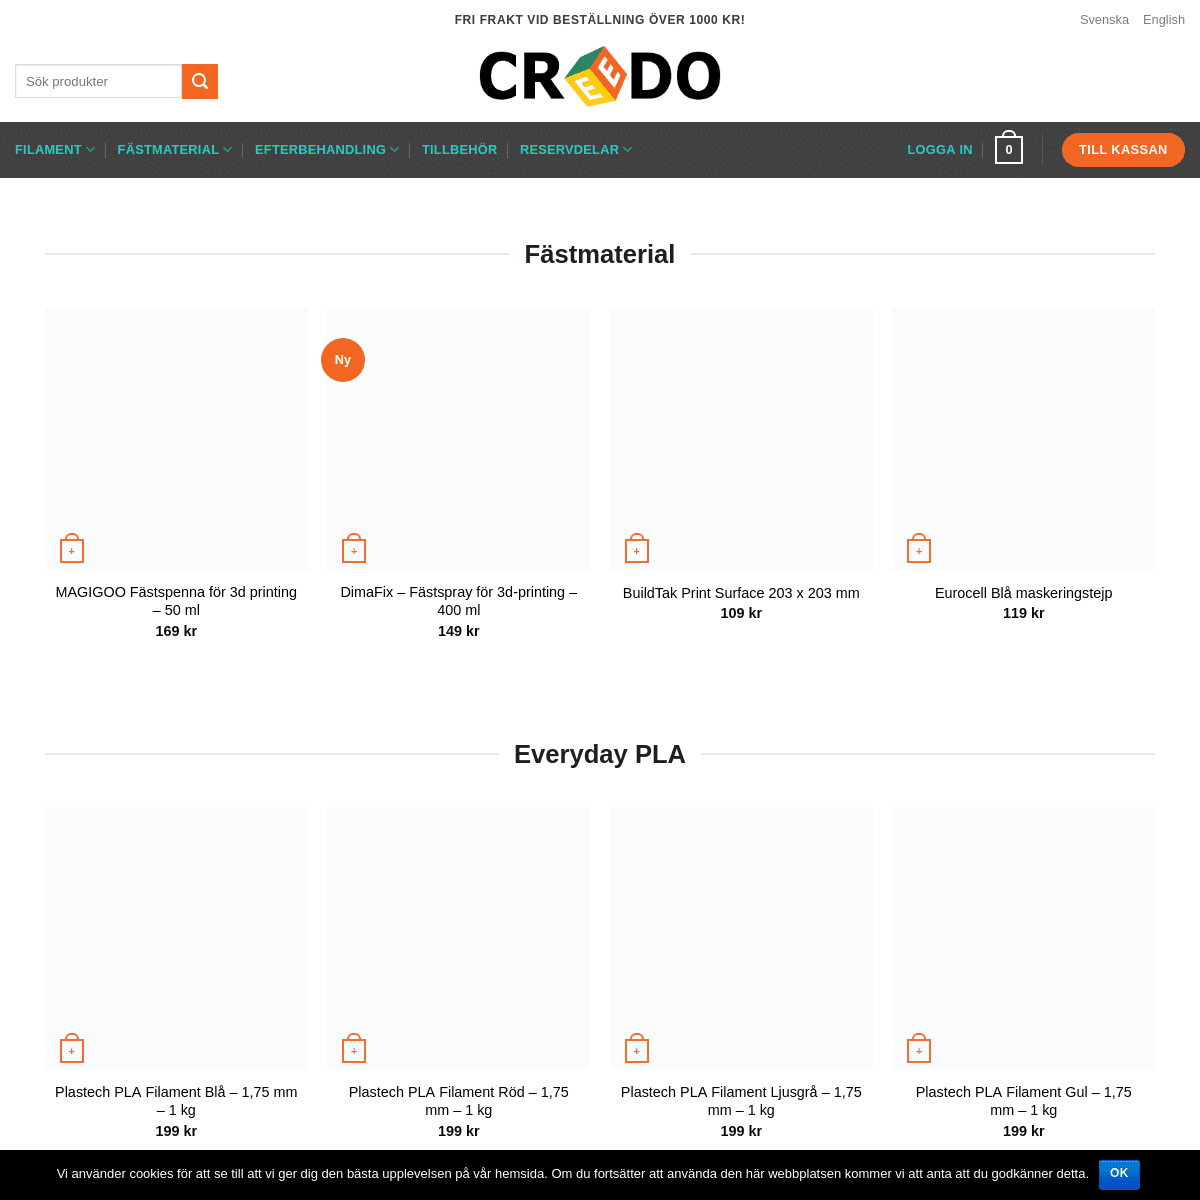 A complete backup of creedo3d.se